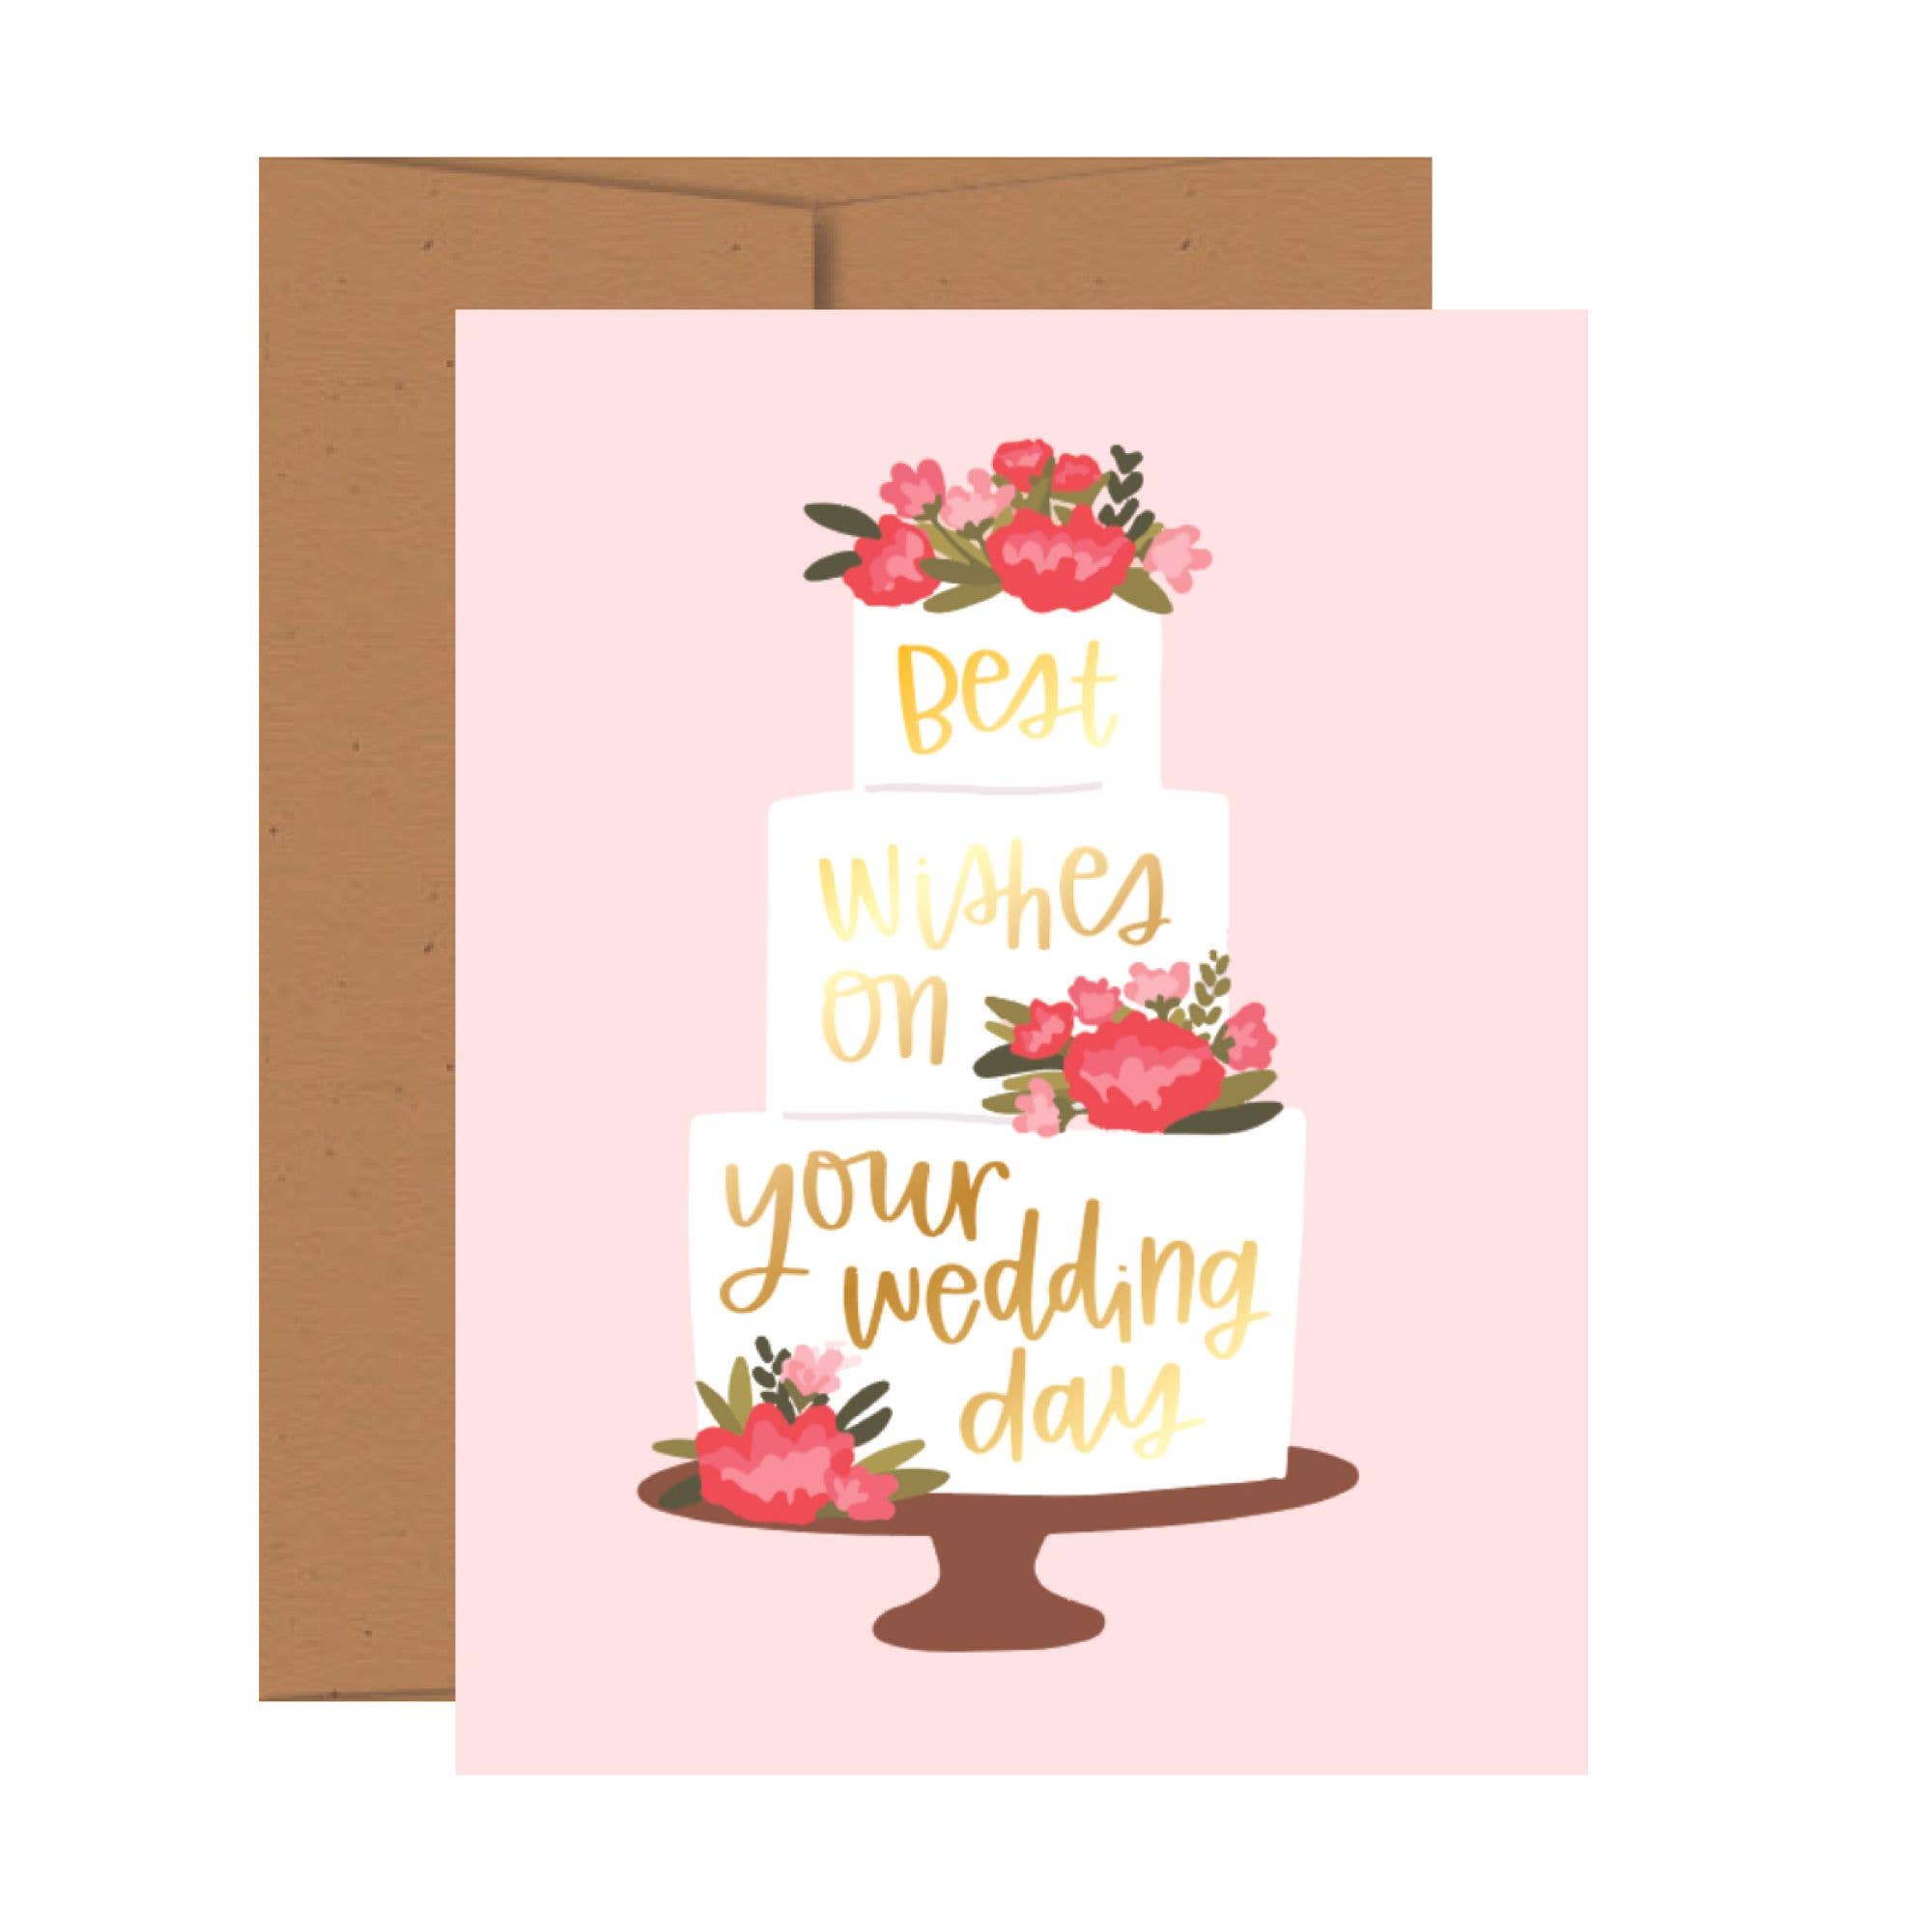 Wishes on Wedding Day Greeting Card